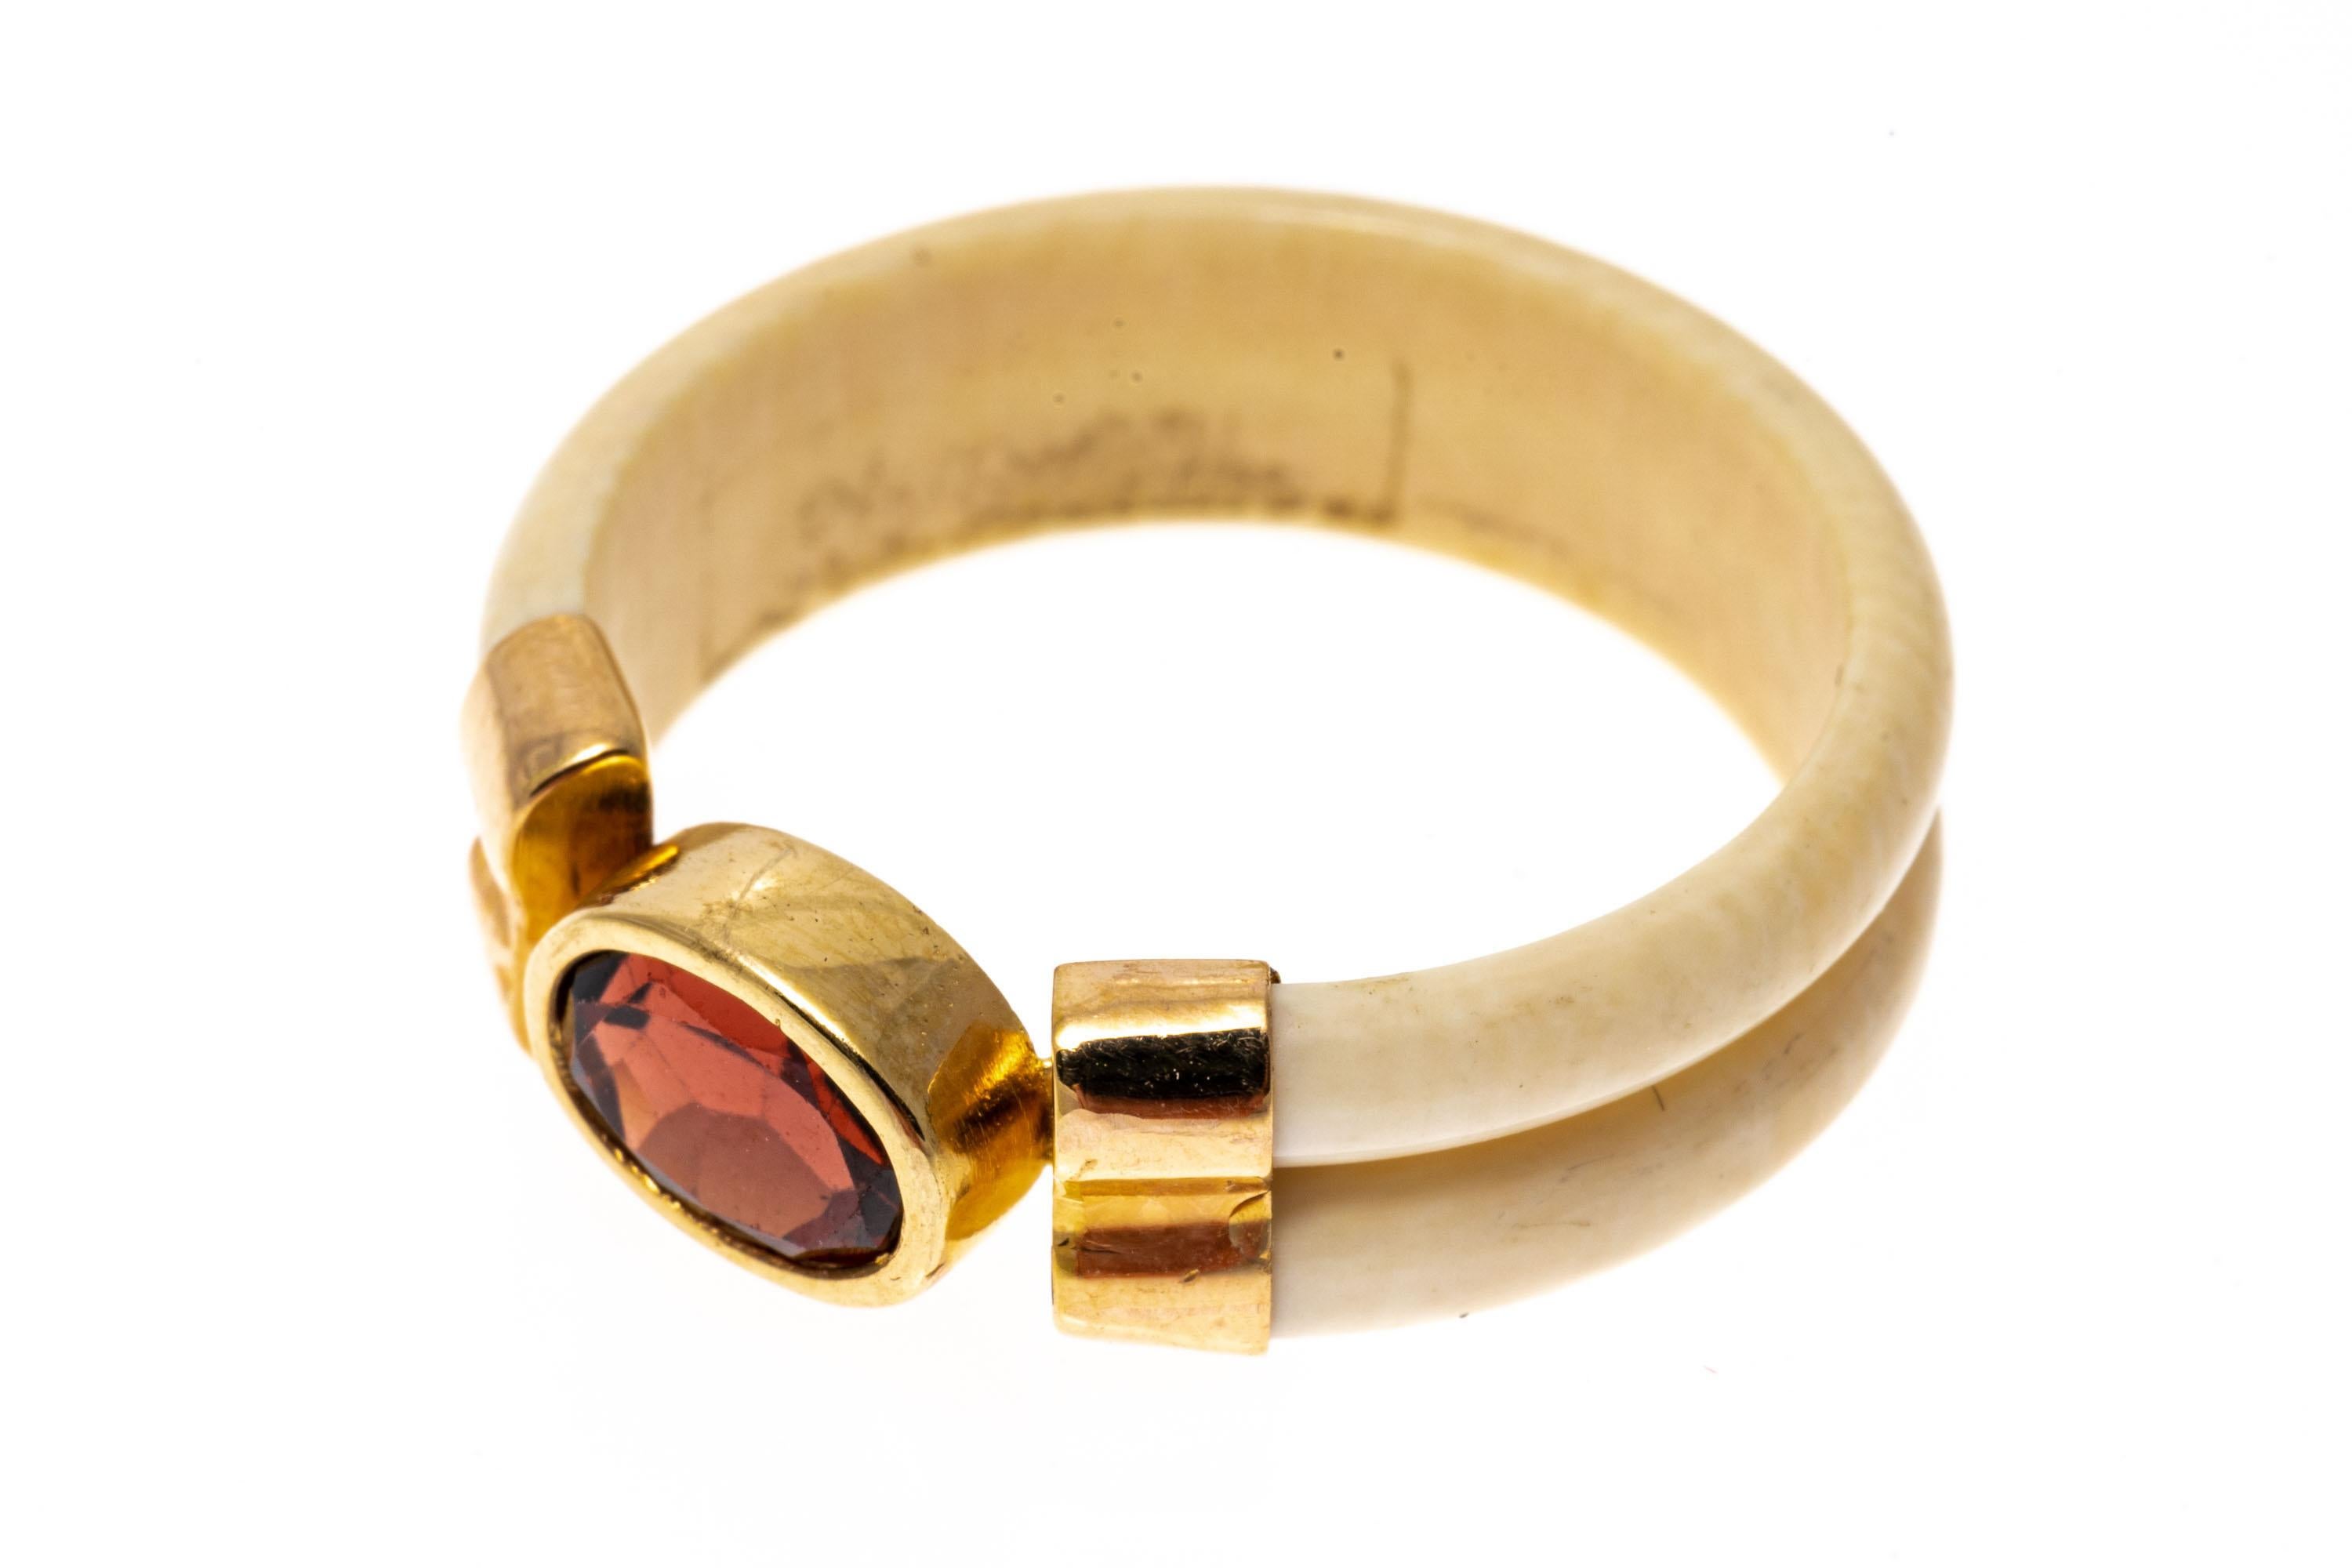 Oval Cut 14k Yellow Gold Carved Bone And Bezel Set Garnet Band Ring, Size 7.25 For Sale